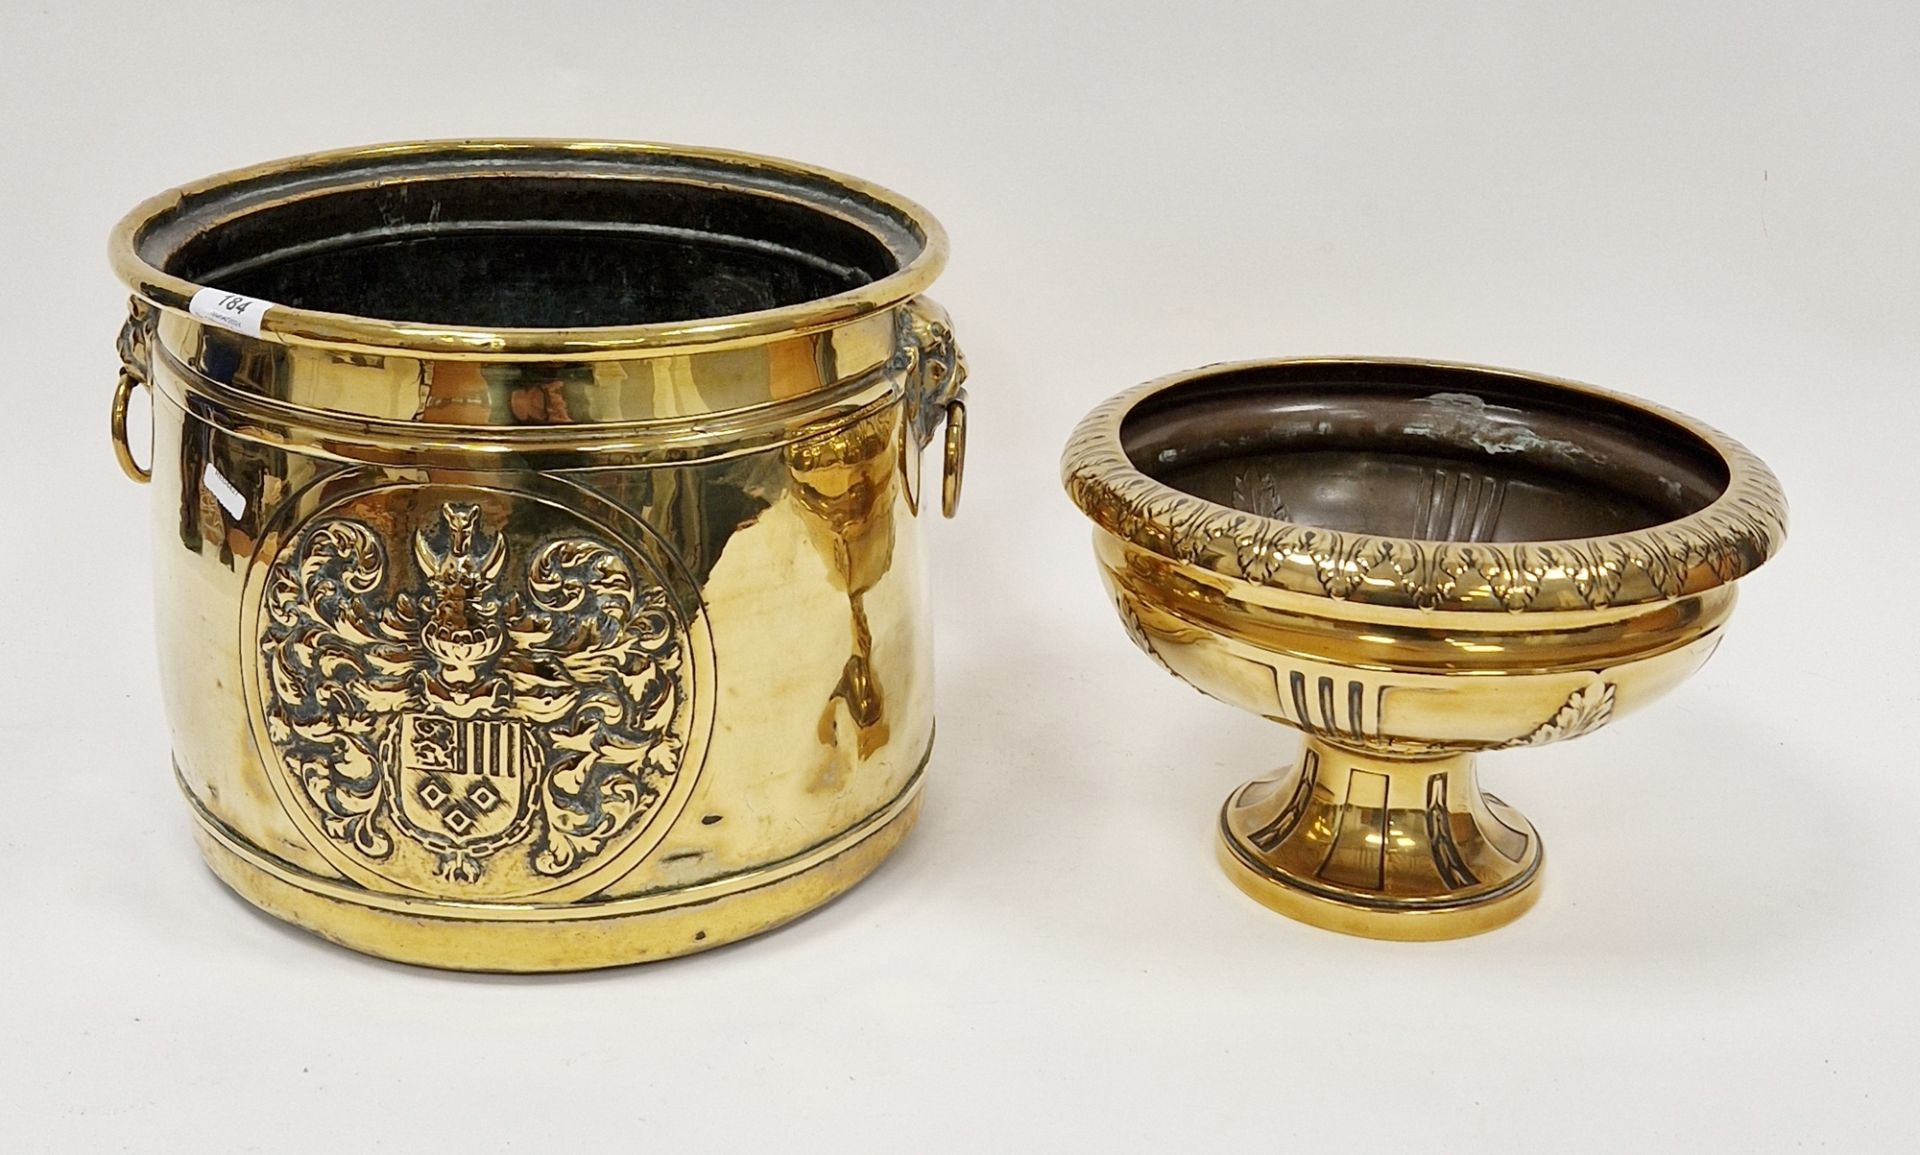 Edwardian embossed brass coal scuttle of cylindrical form, decorated with a mantled armorial, with - Image 4 of 6